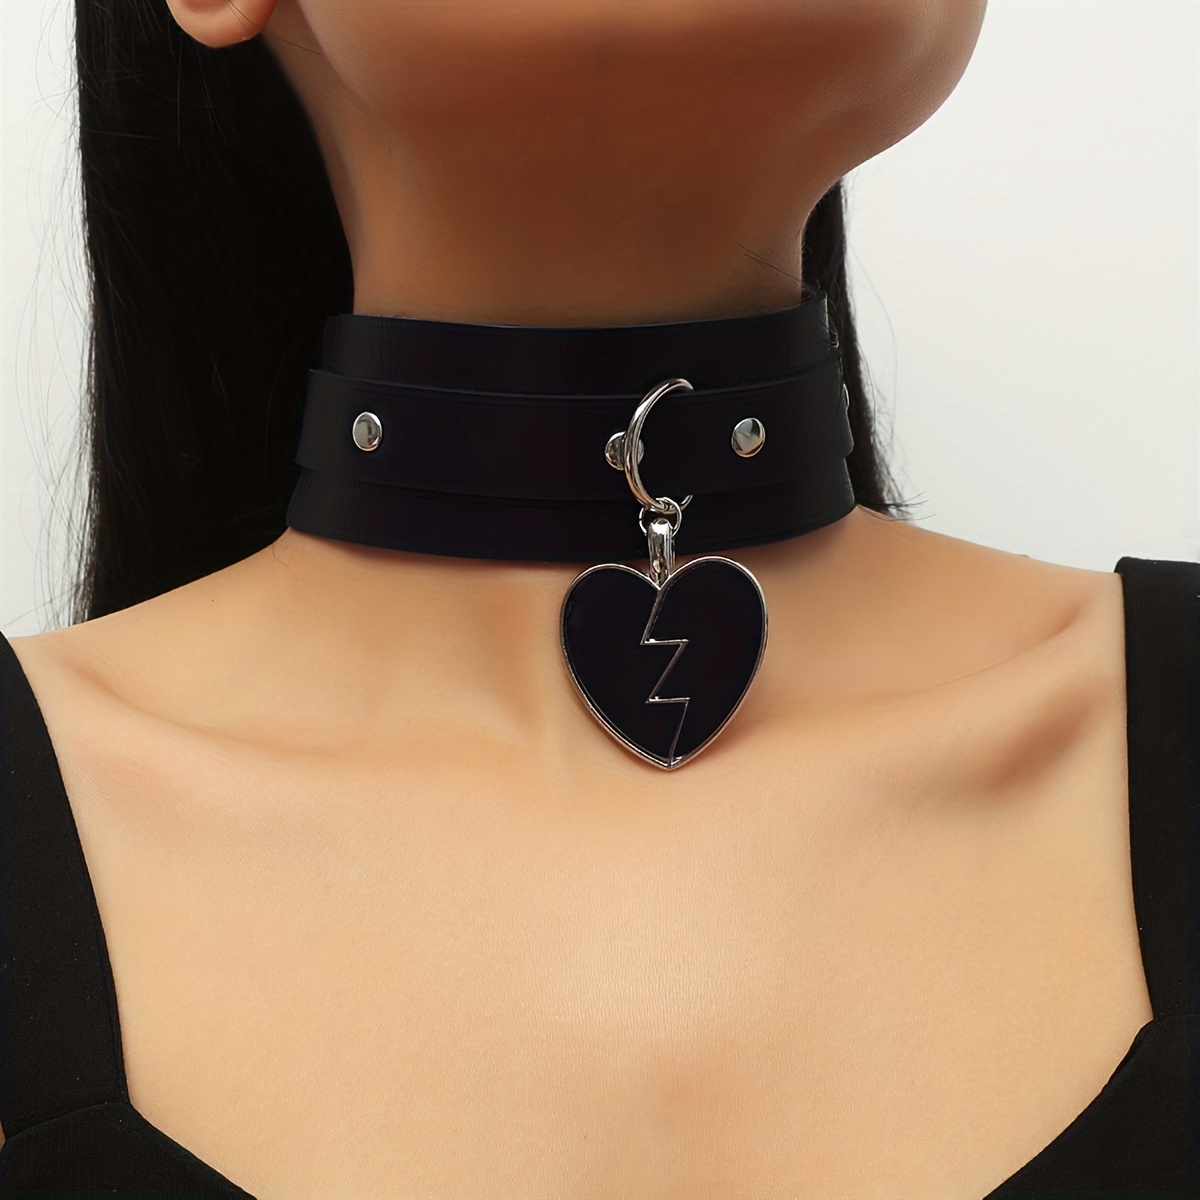 Women's Men's Heart Punk Goth Emo Style Leather Choker Necklace